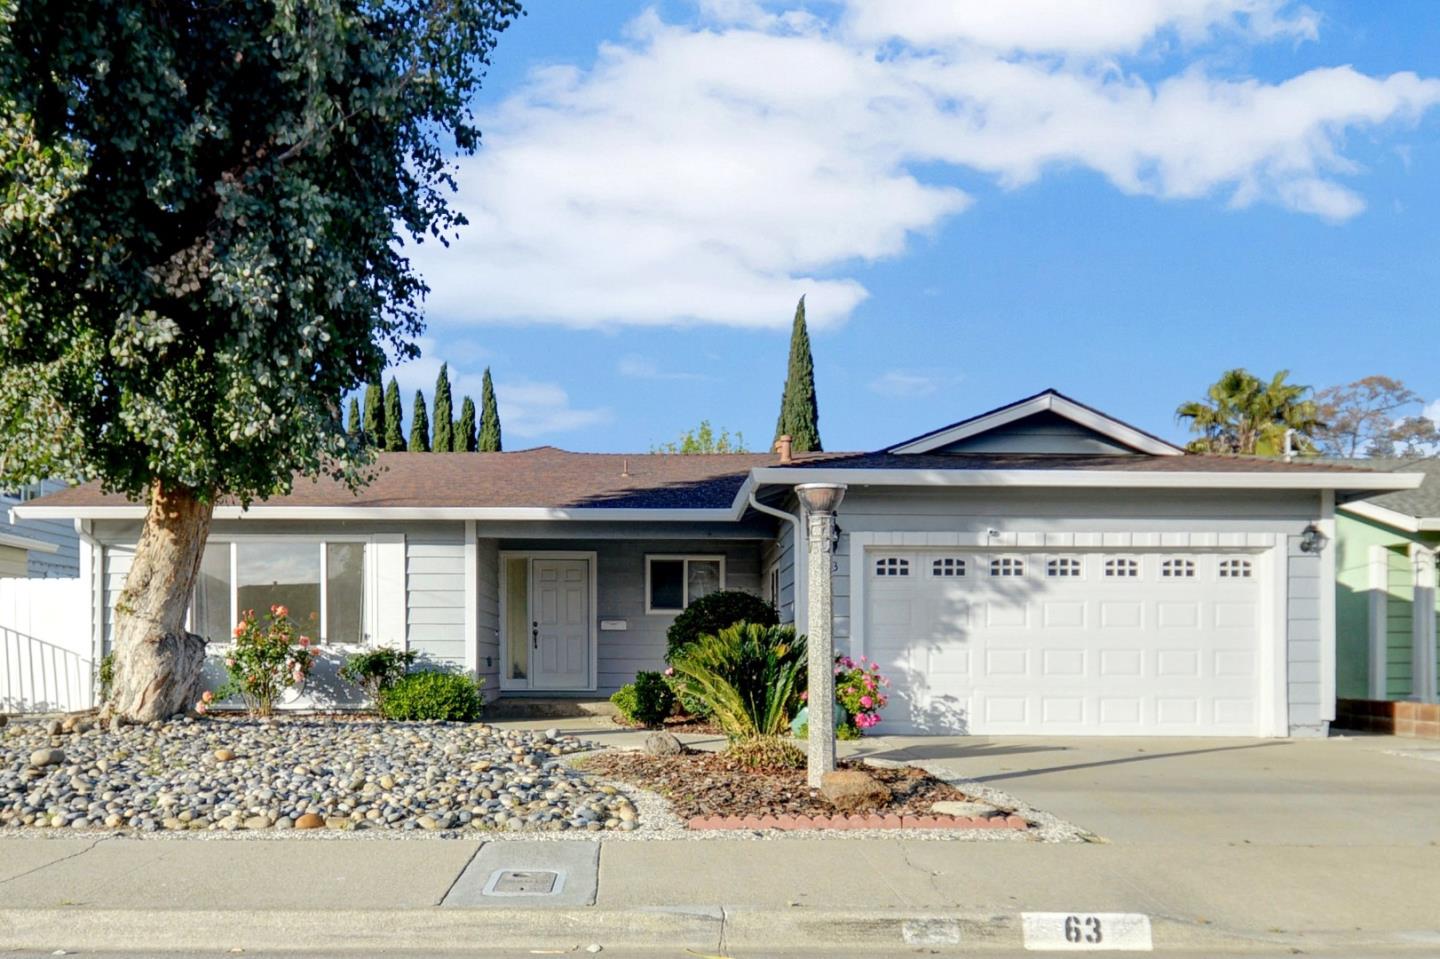 Photo of 63 E Lake Dr in Antioch, CA